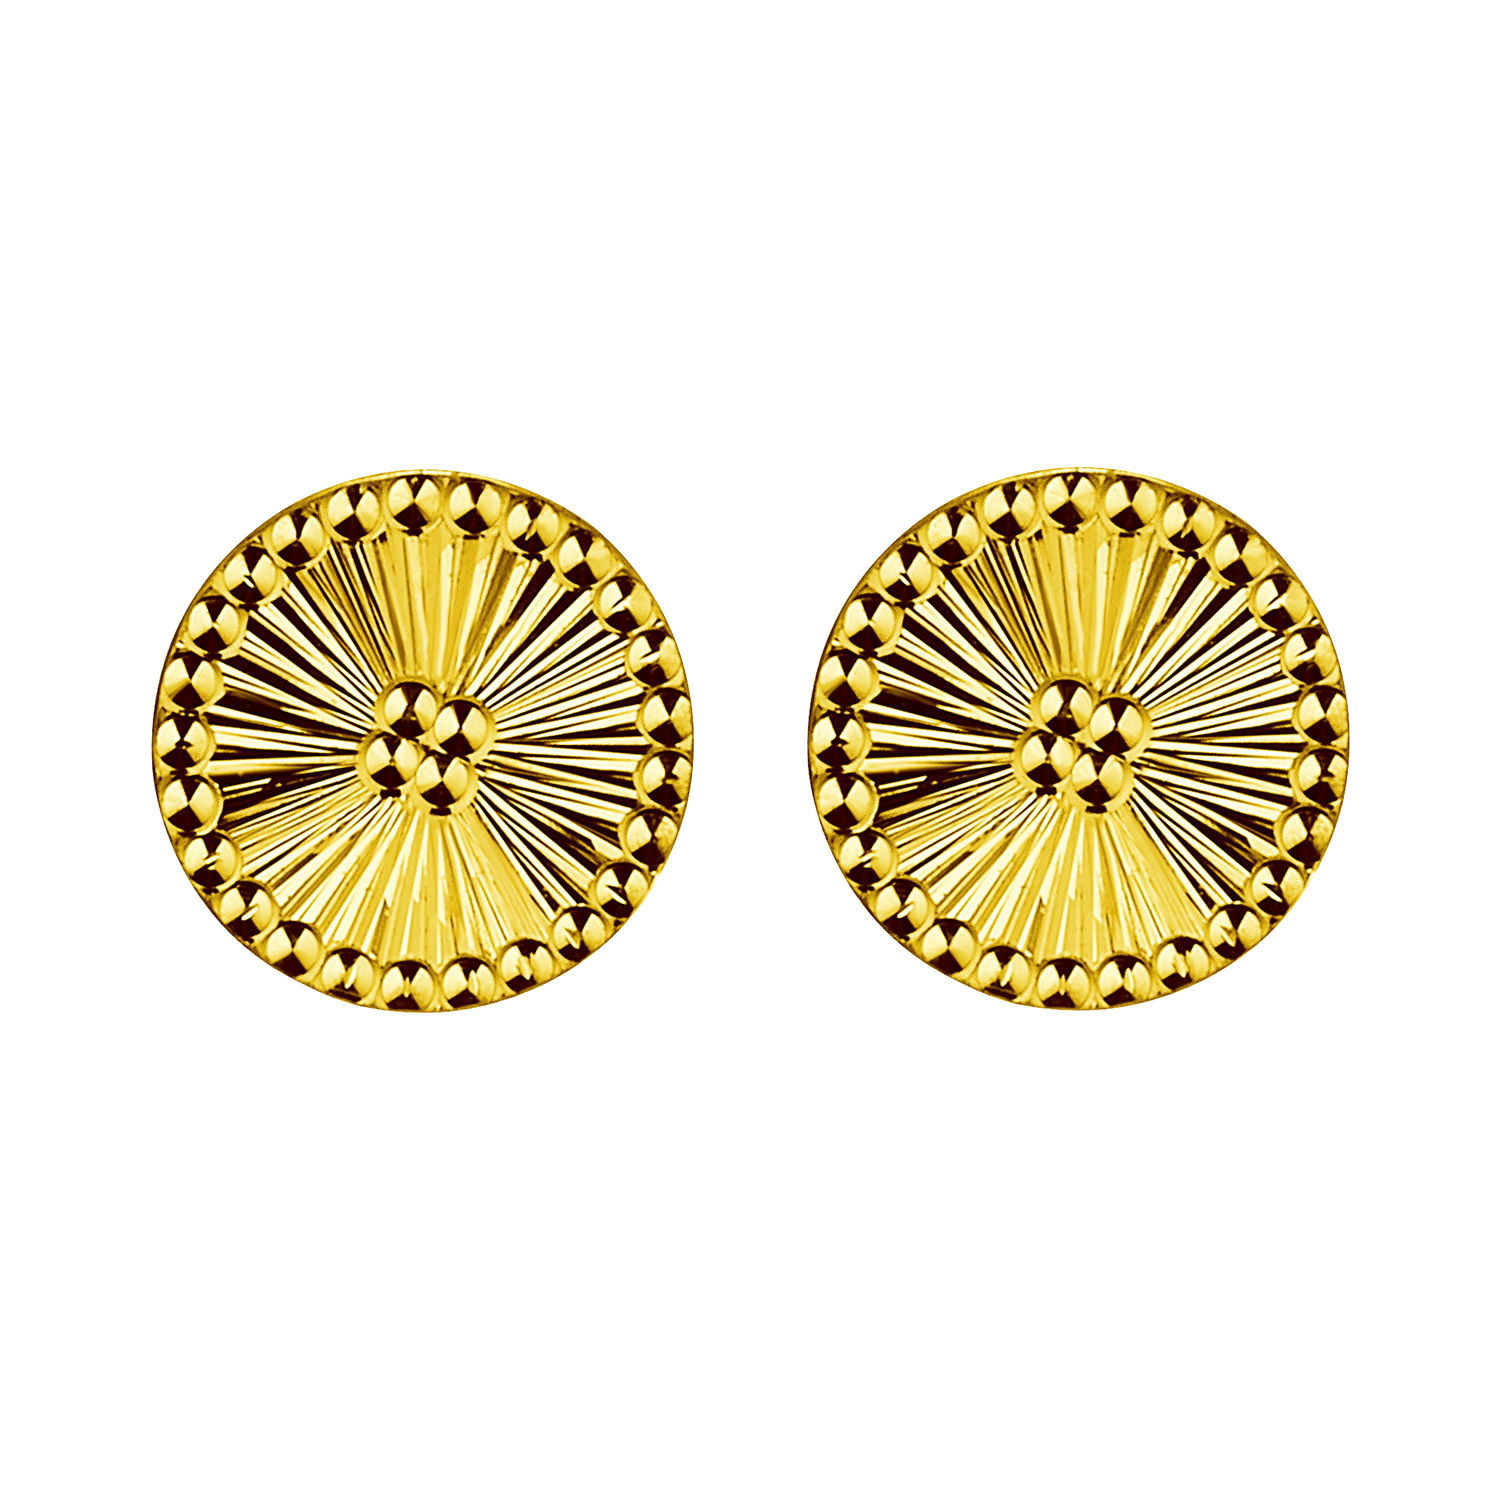 Goldstyle “Game of Life” Round Earrings